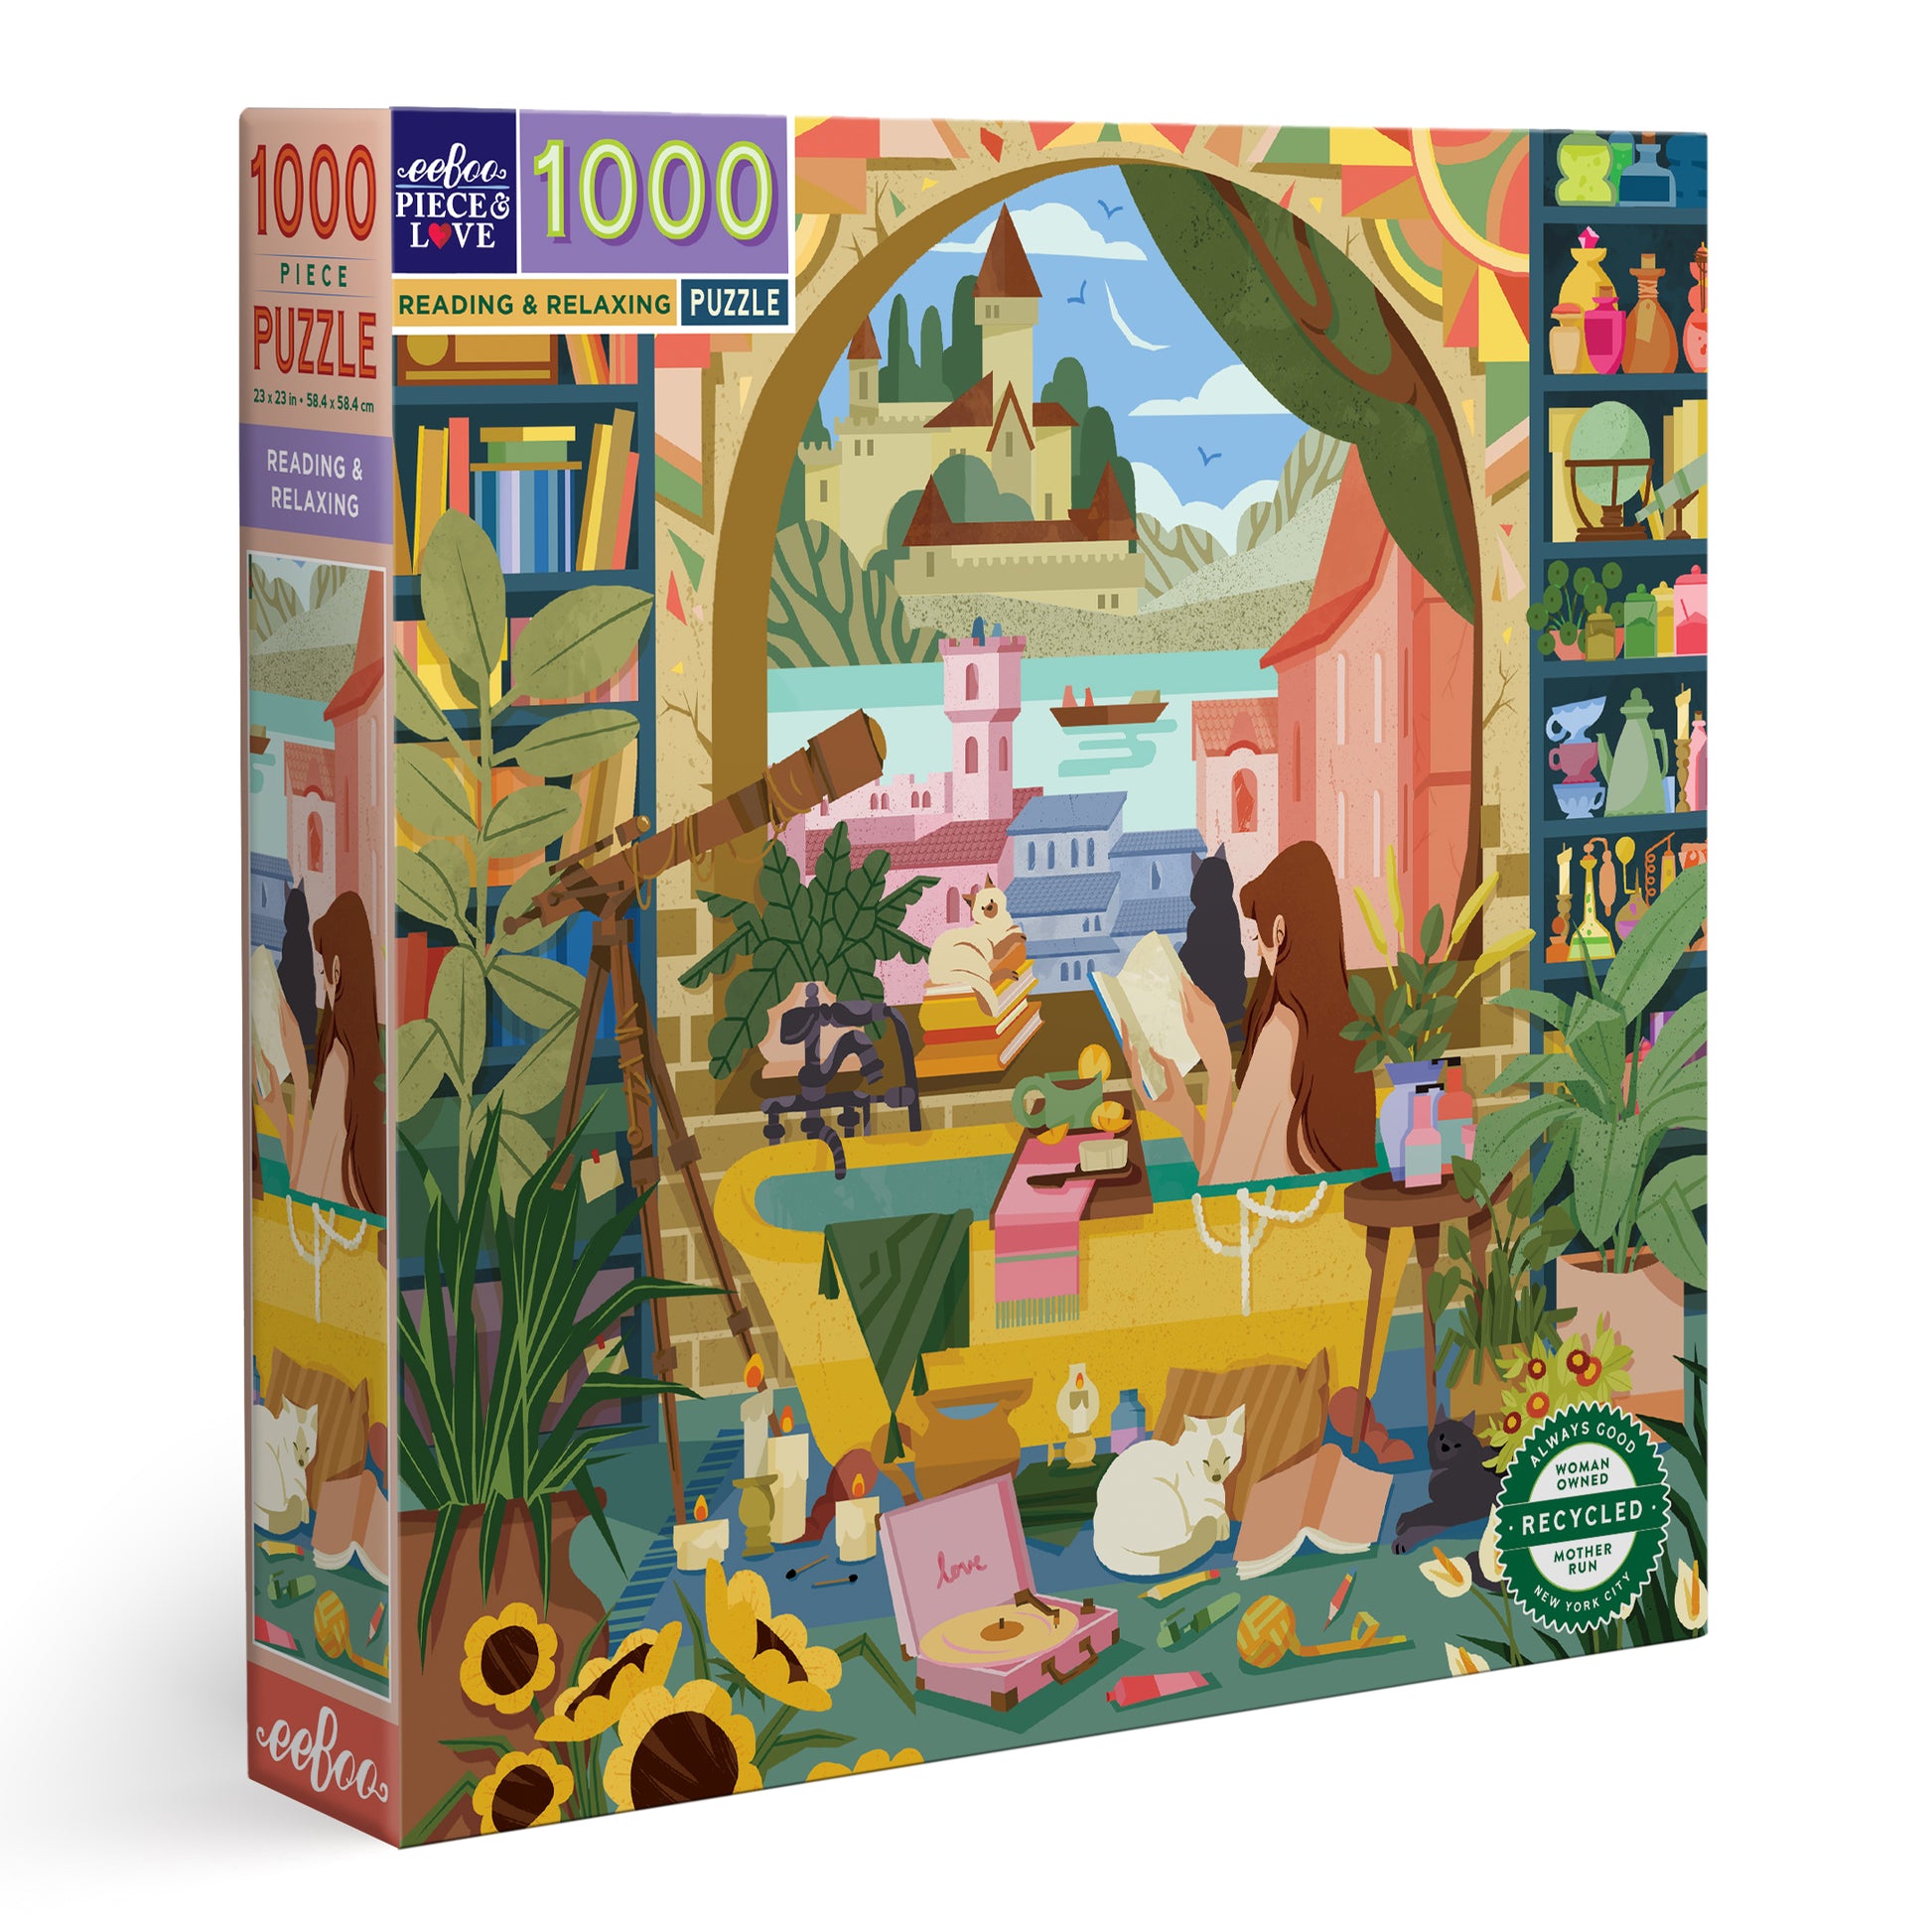 Reading & Relaxing 1000 Piece Jigsaw Puzzle | Unique Self Care Gifts for Women | Features Castles, Cats, Books, & Plants